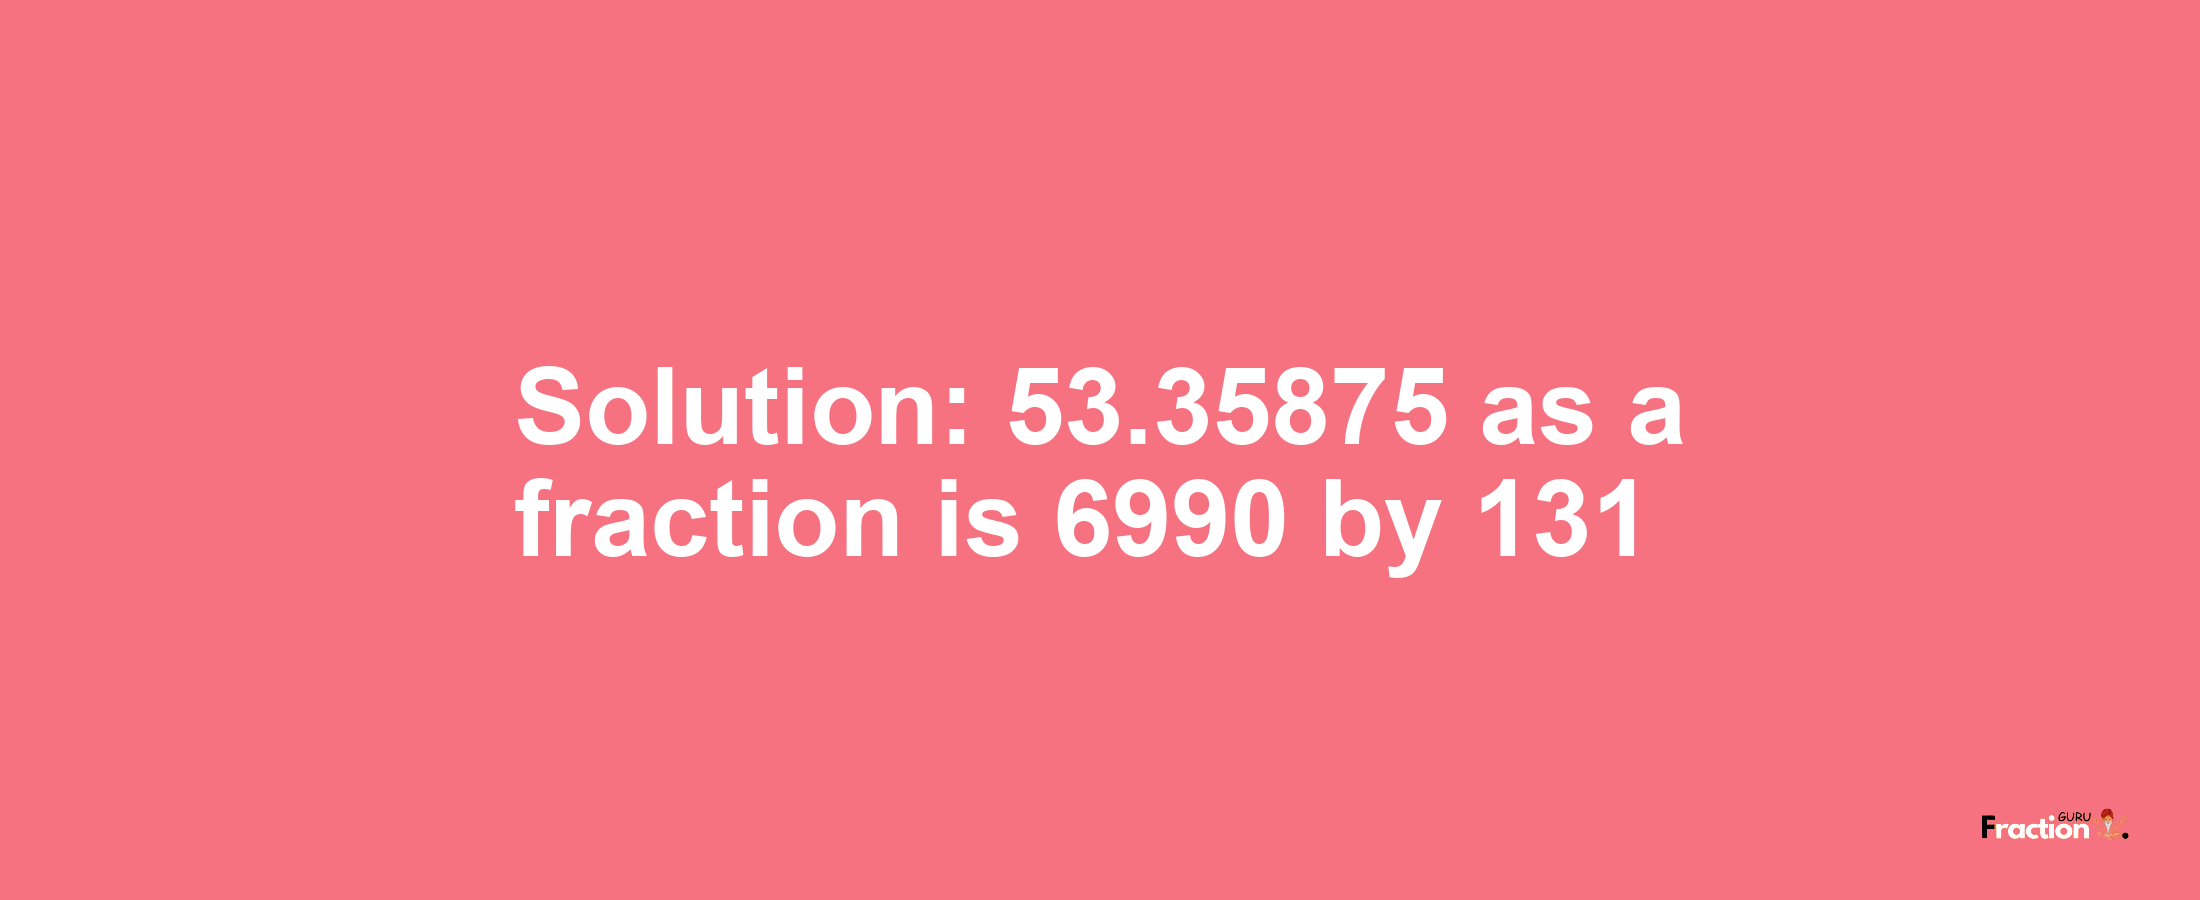 Solution:53.35875 as a fraction is 6990/131